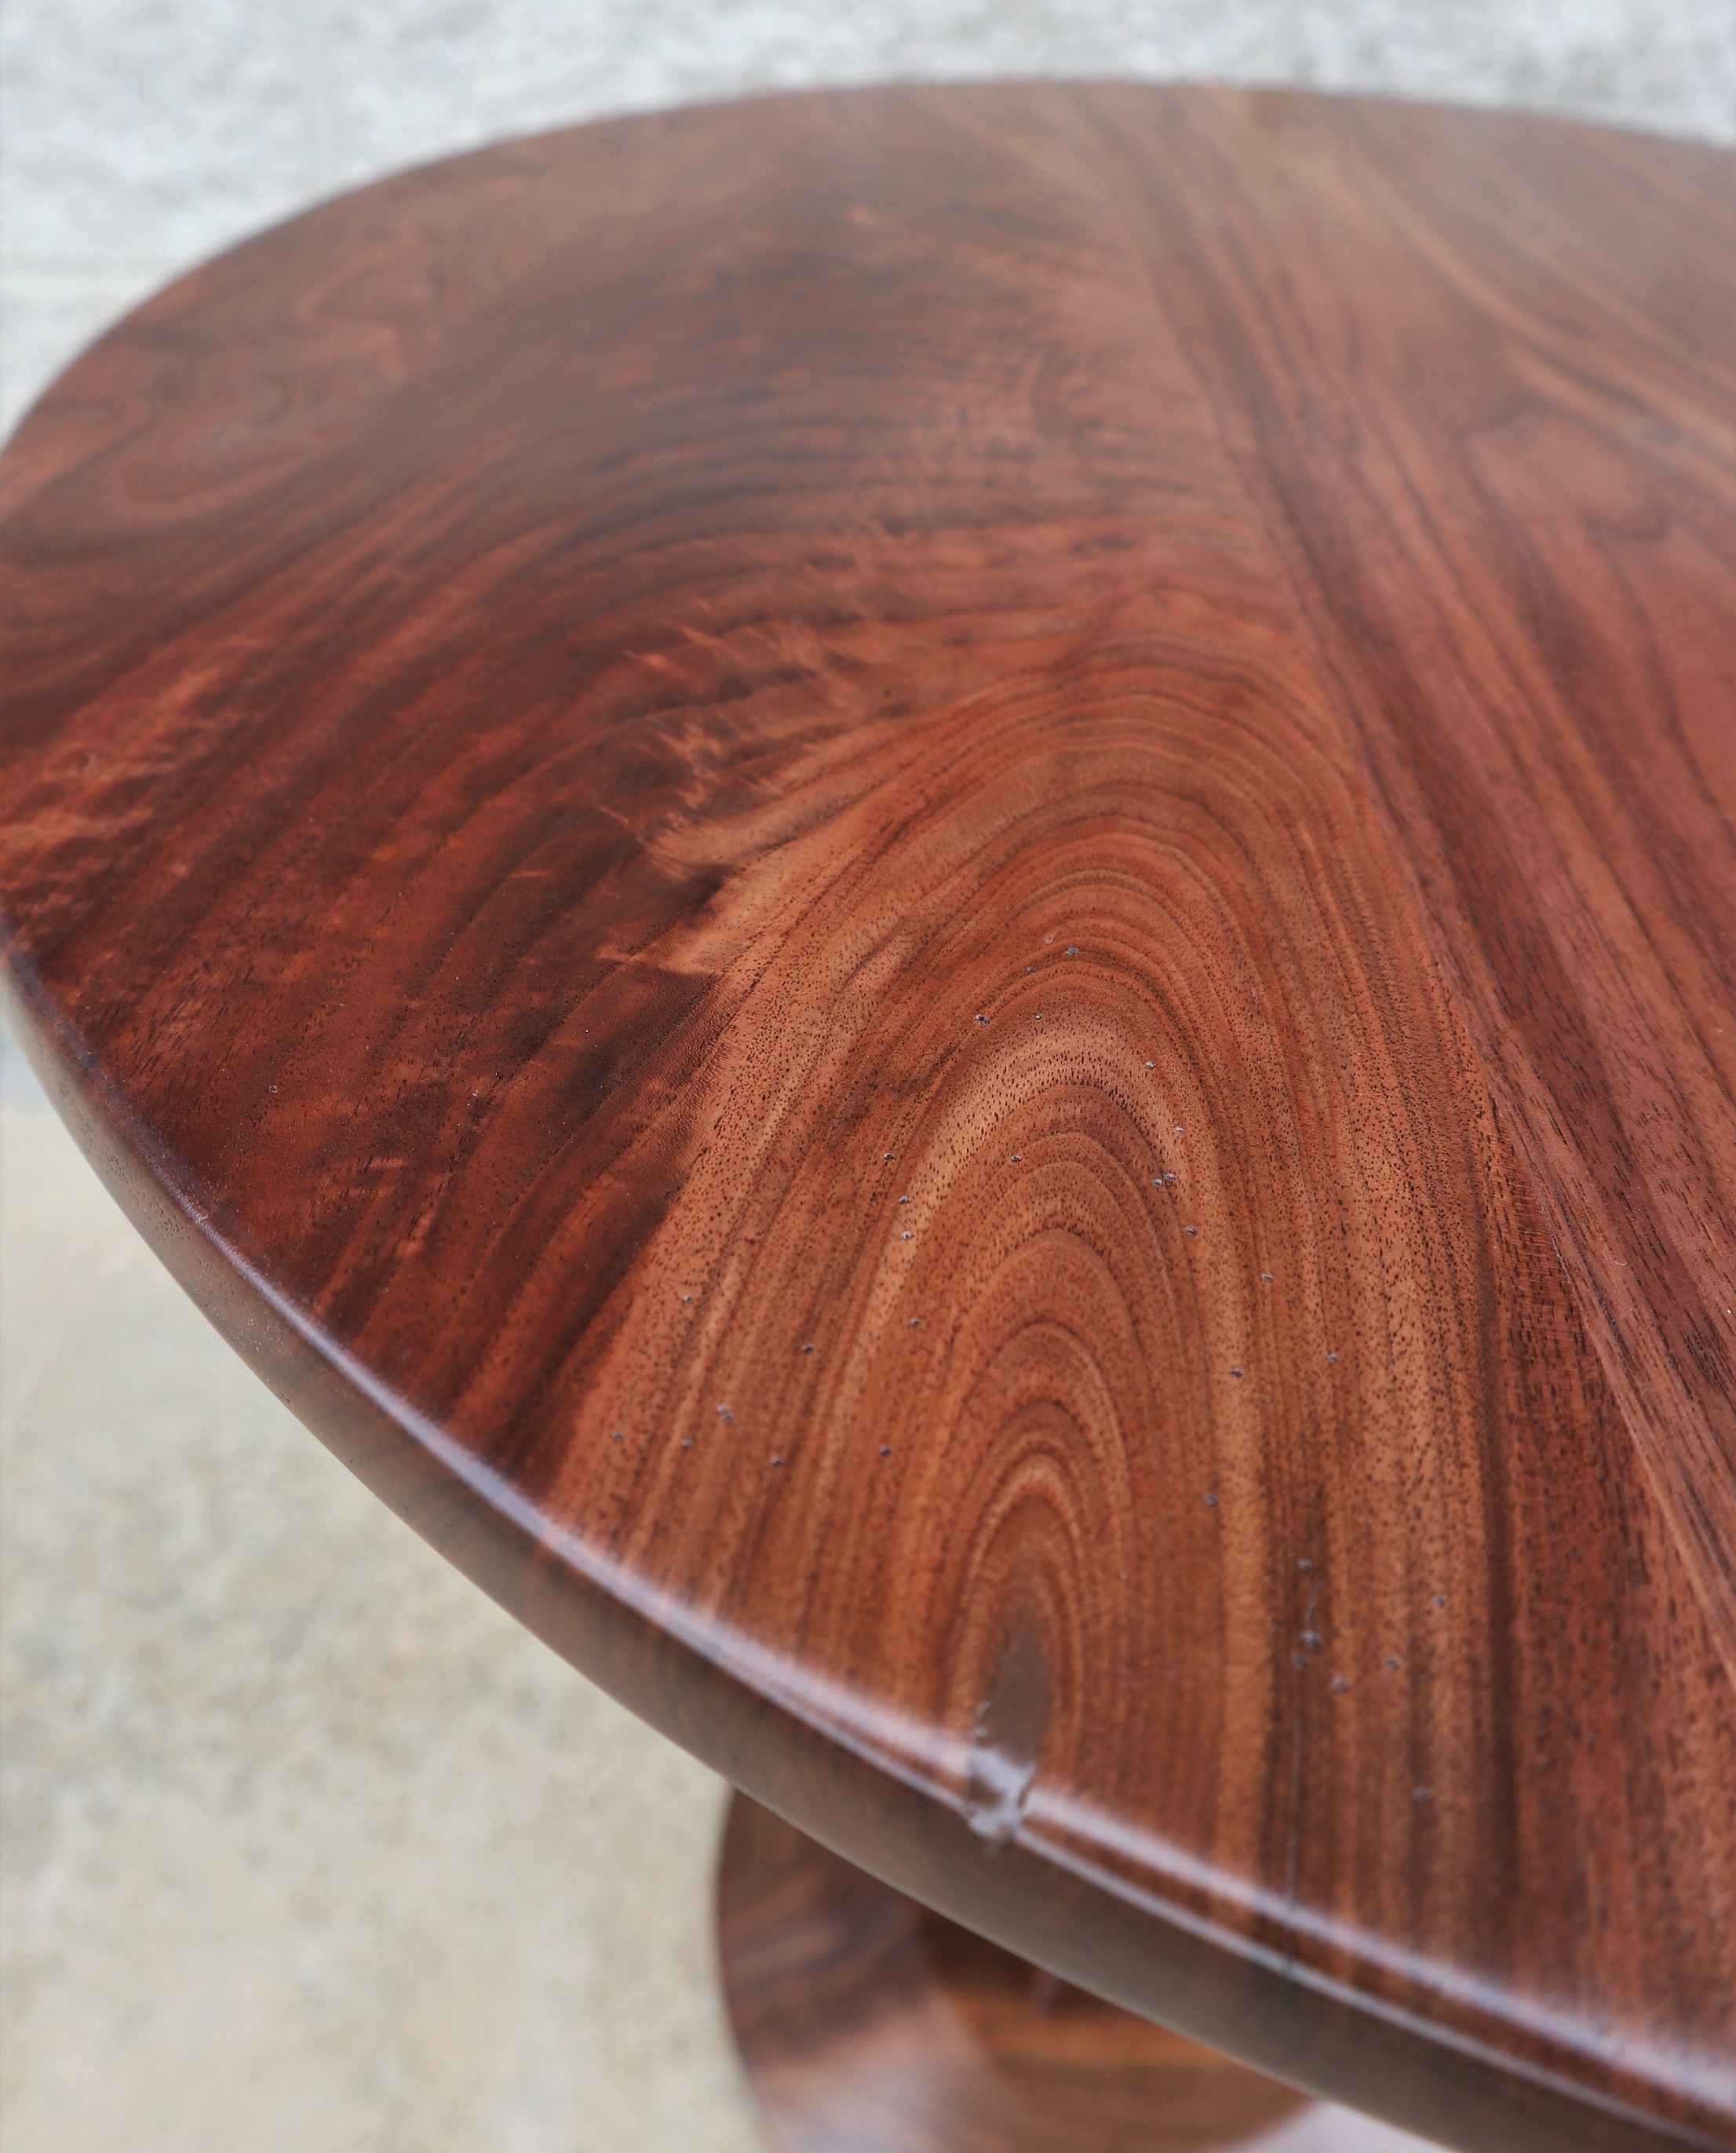 Walnut end table in humidity blog